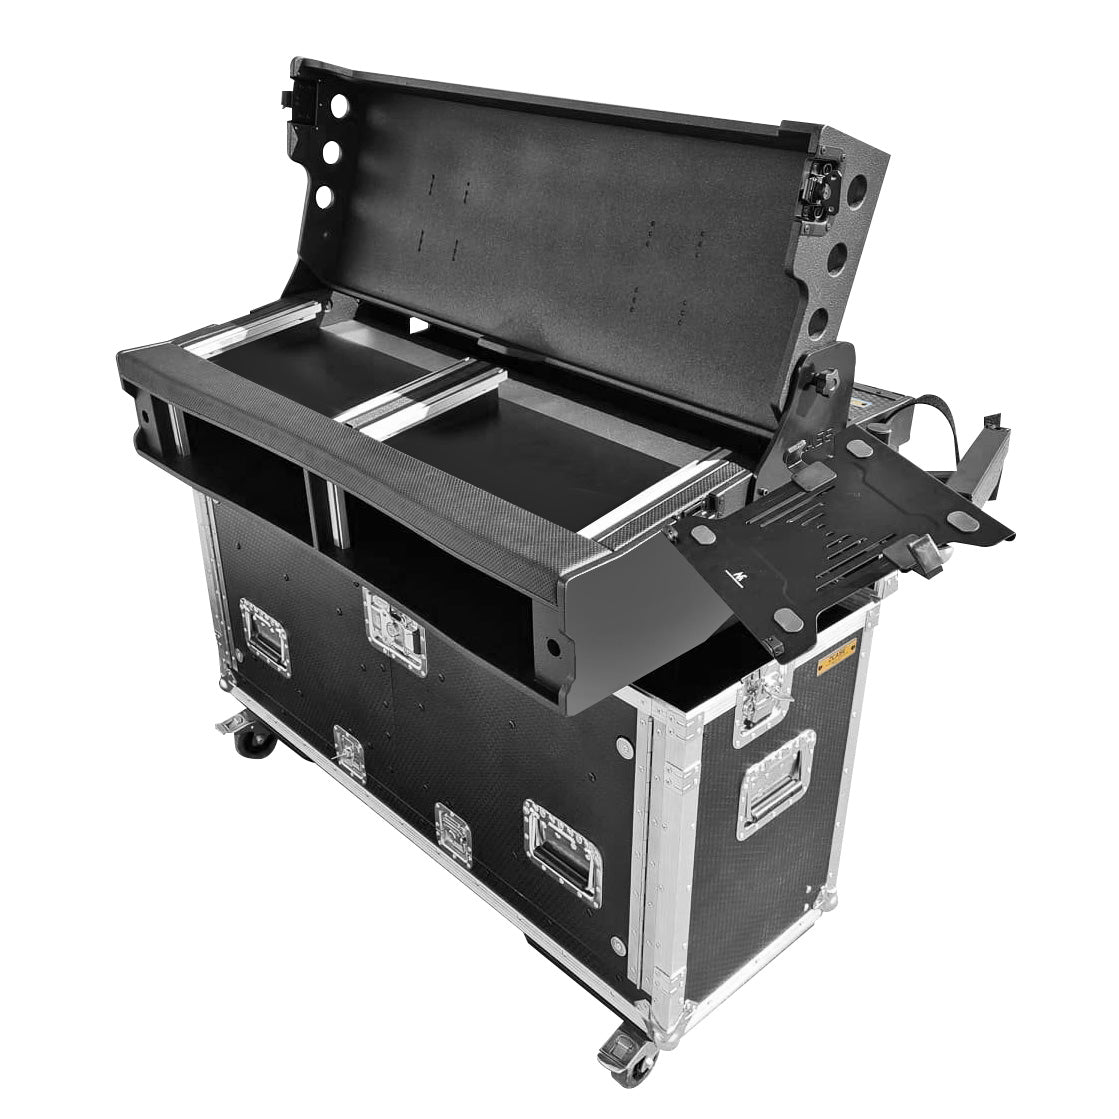 Pro X For WAVES eMotion LV1 Live Mixer Flip-Ready Hydraulic Console Easy Retracting Lifting Case with 2x 3U Rack Space by ZCASE XZF-WAVESLV1X26U